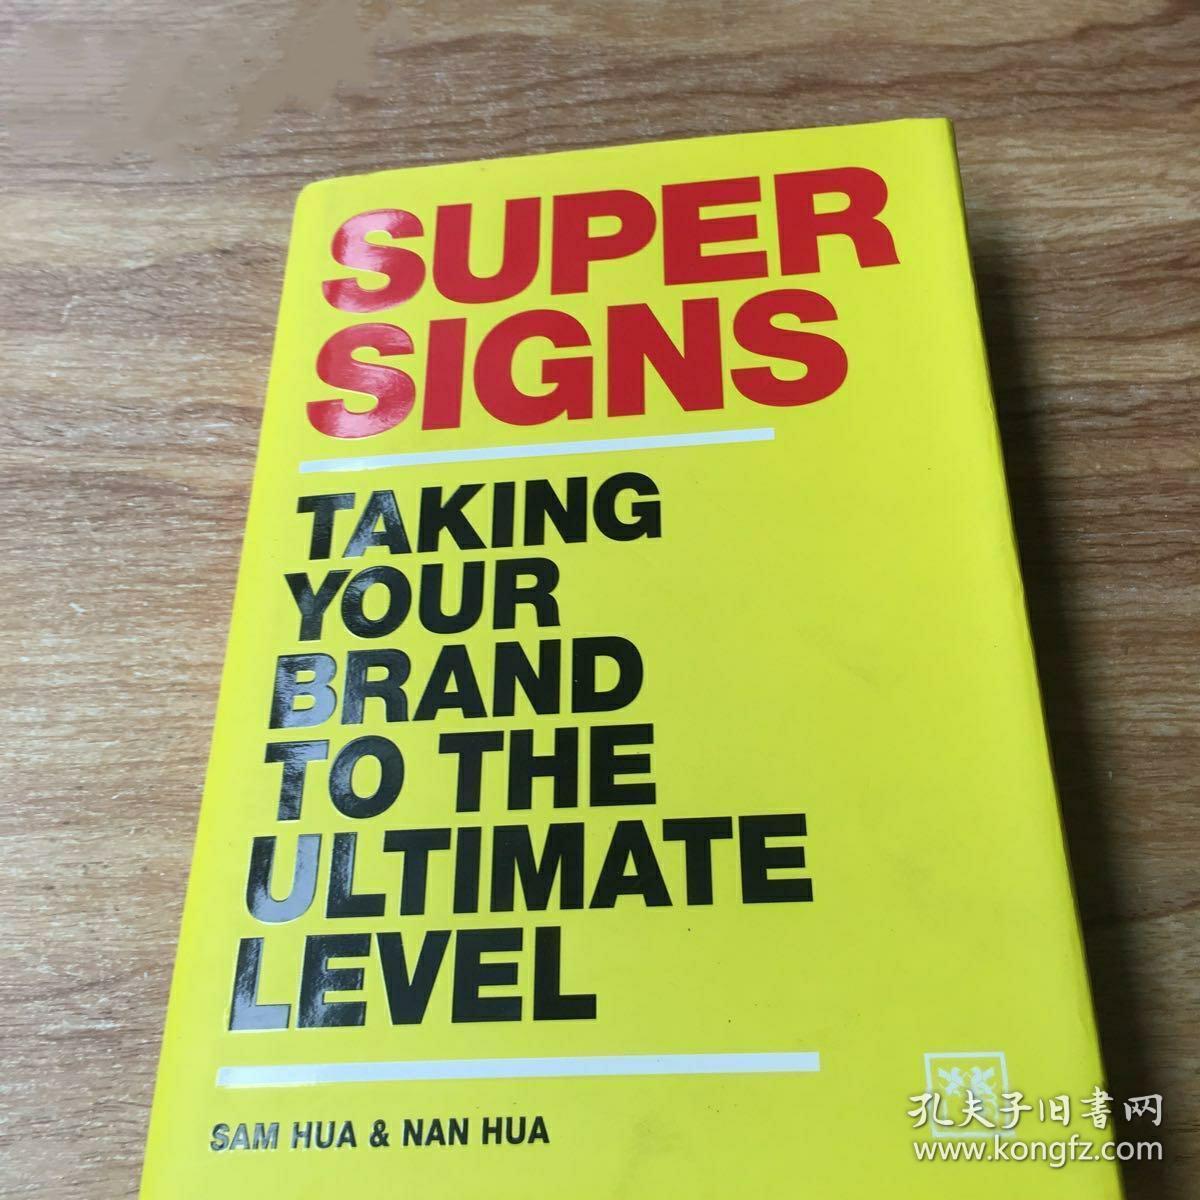 Super signs： Taking your brand to the ultimate level